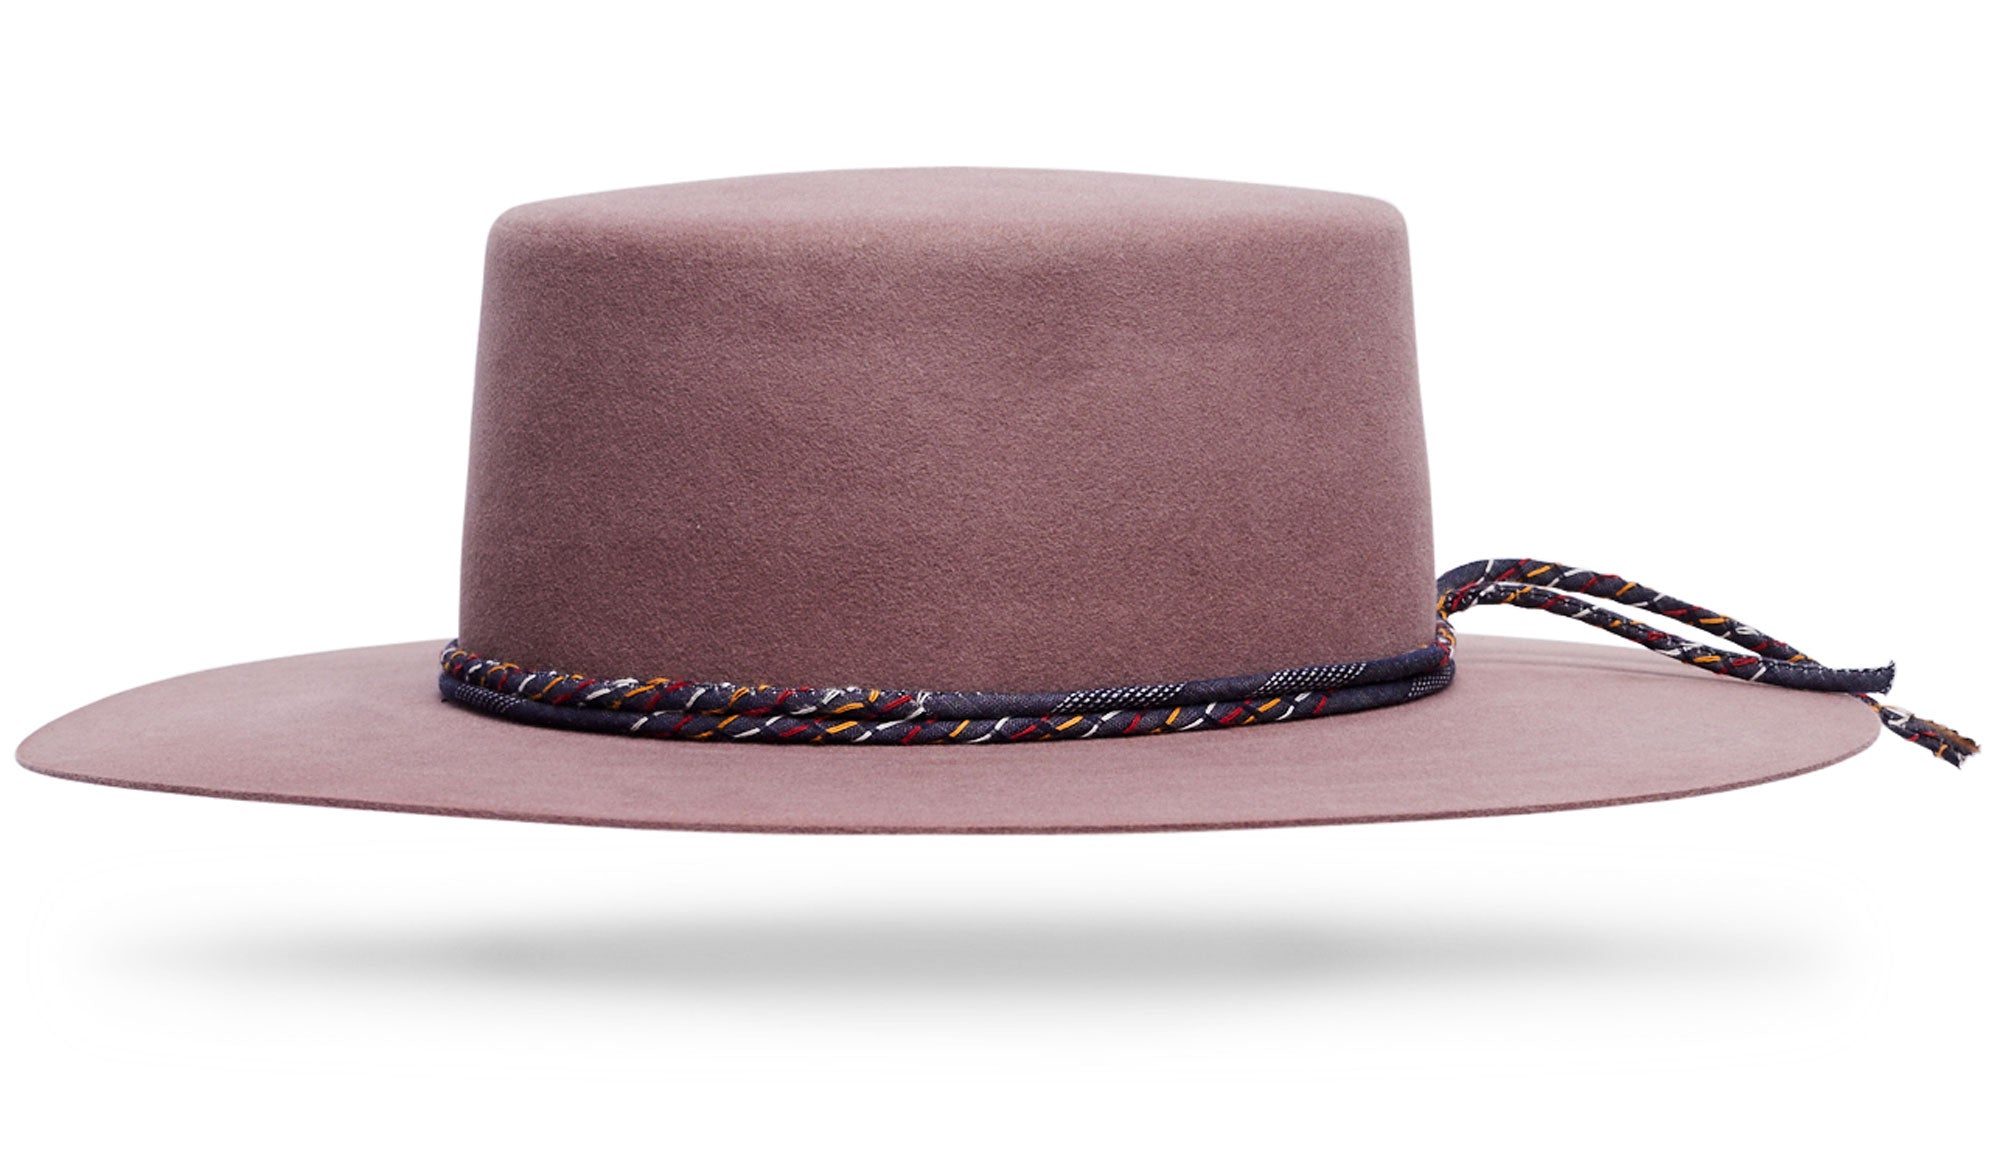 Design
A soft pastel mauve with pale hints of magenta.
Material
100% Light Weight Beaver blend sustainably acquired
Specifications
4 flat top bolero crown with 3 1/2 table top brim. Finished off with a hand-rolled pic stitched denim band. Handmade in our atelier in NYC. Please allow 4-6 weeks to custom make this special piece.